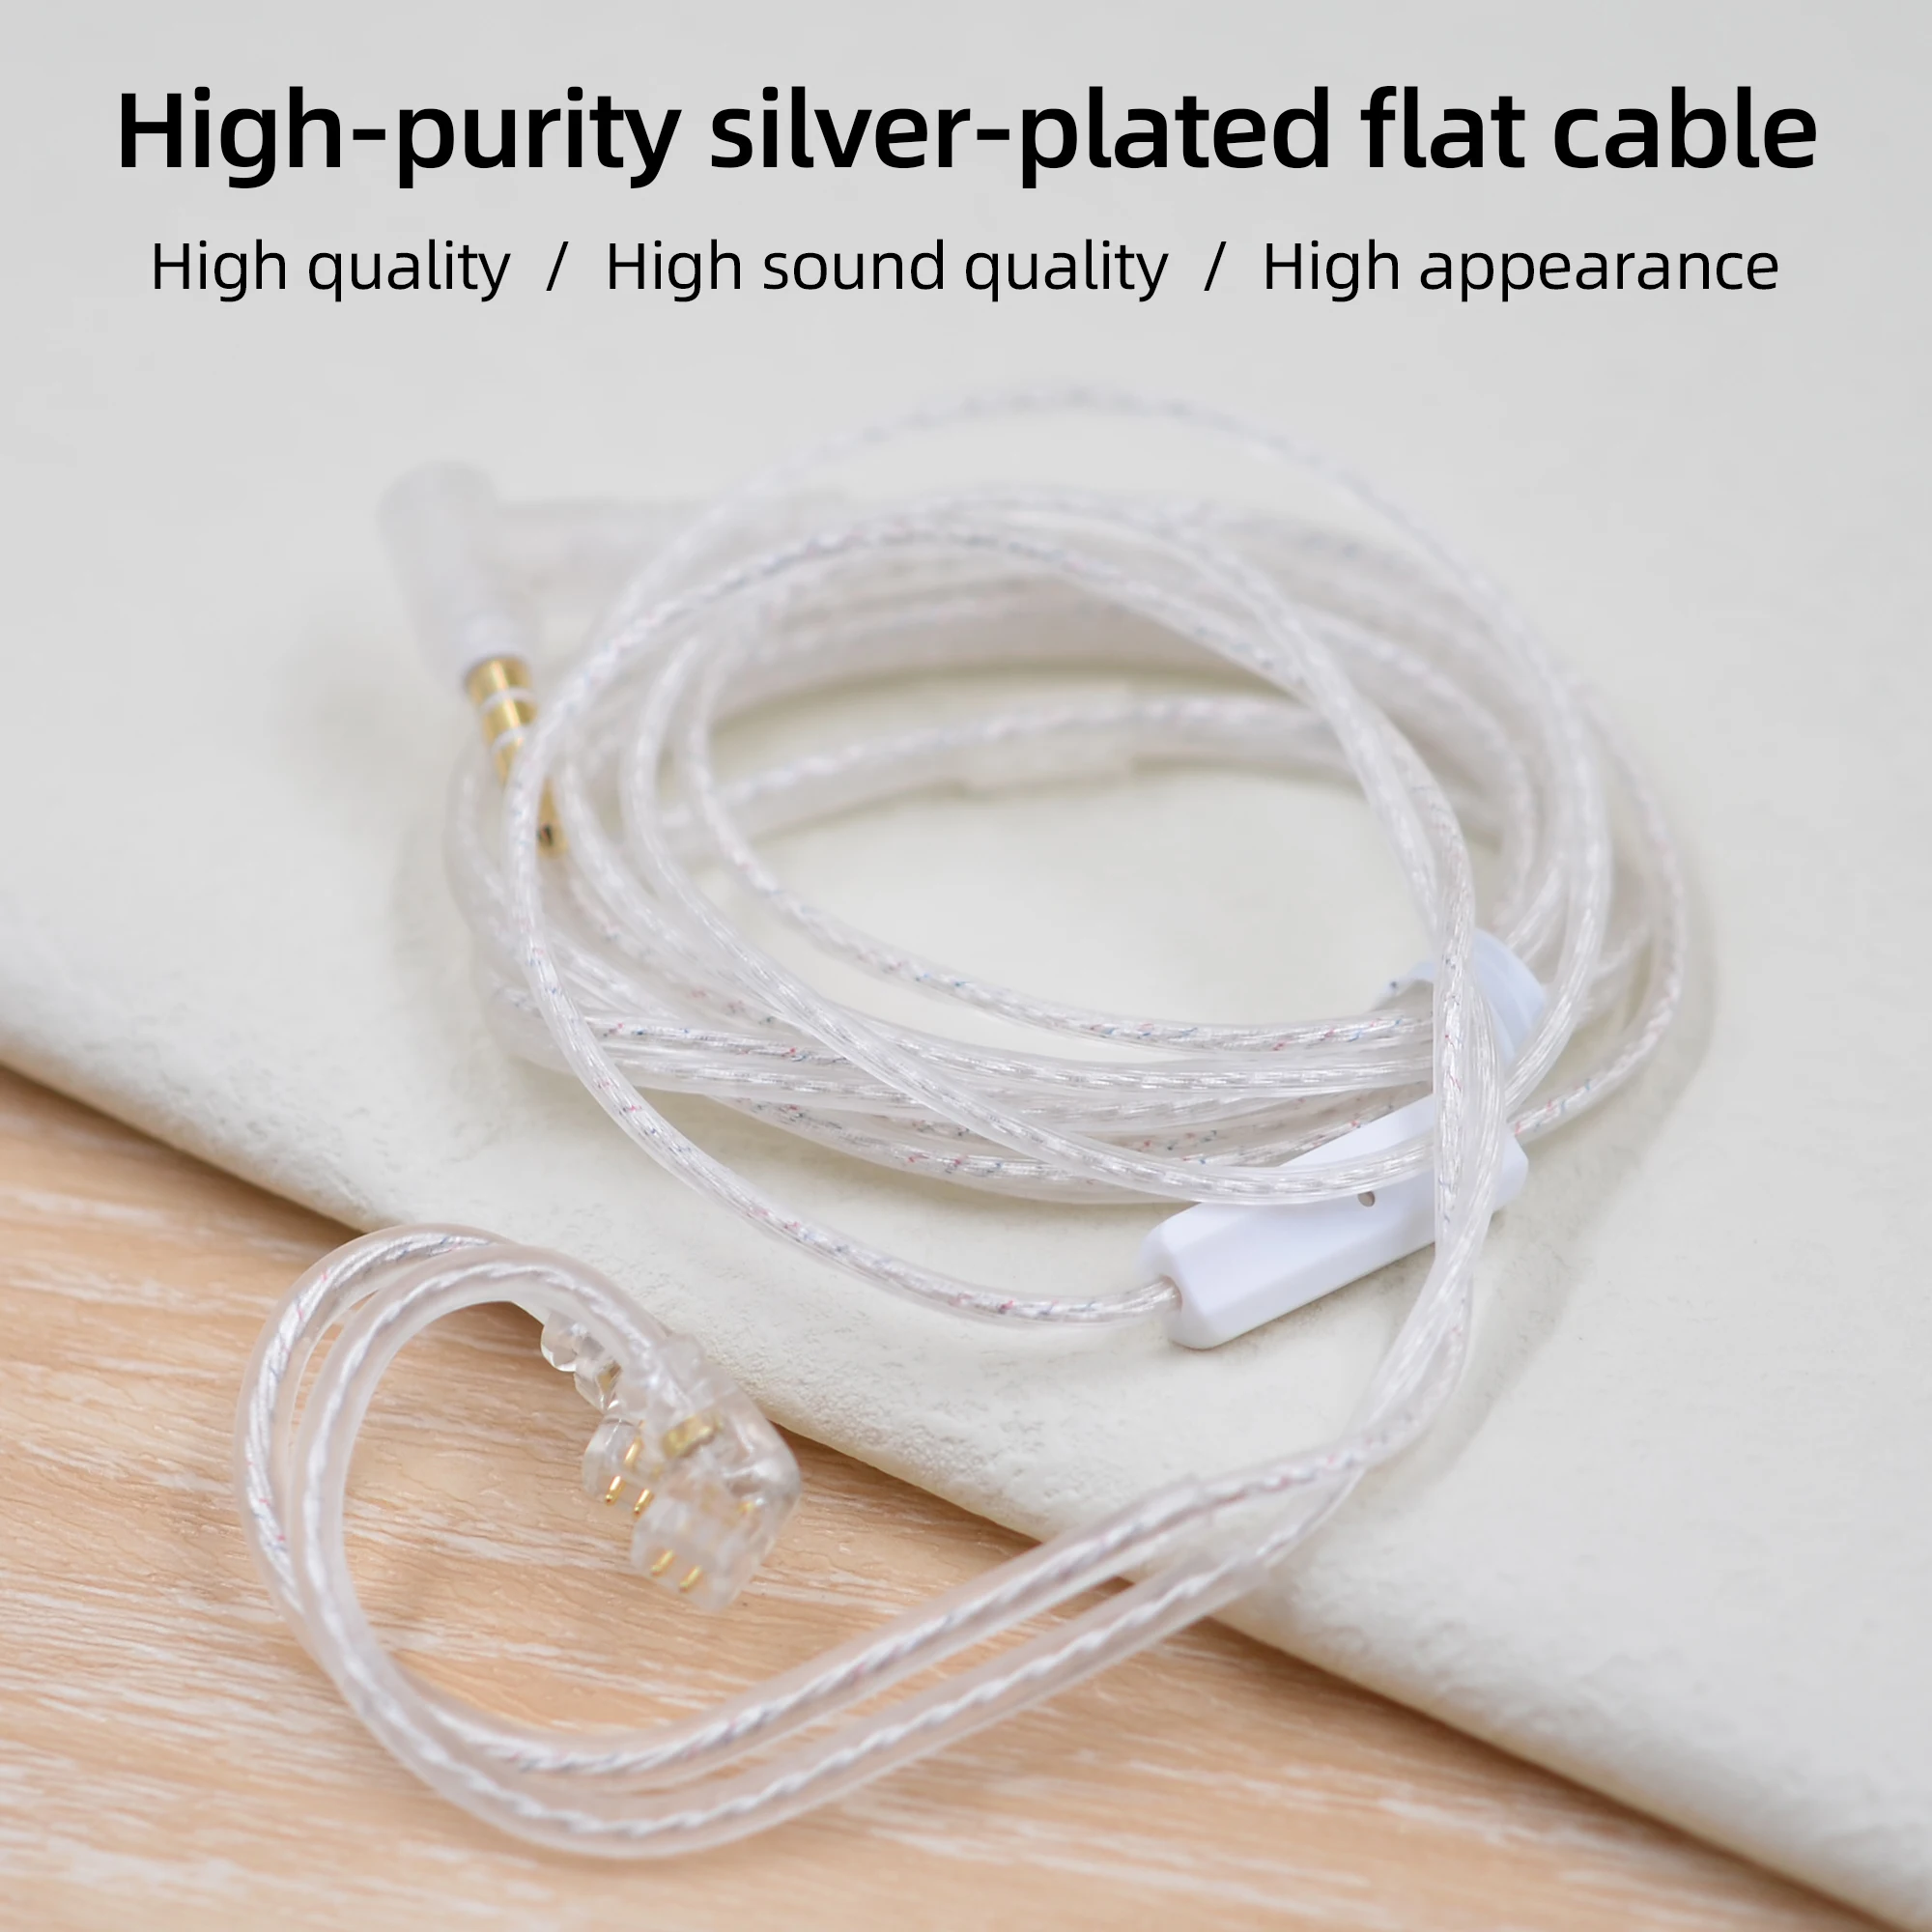 

KZ Earphones Cable High Purity Silver-plated Flat Upgrade Cable 0.75mm 2-Pin Headphone Wire For KZ ZSN ZST ZEX Pro ZST Pro ED12